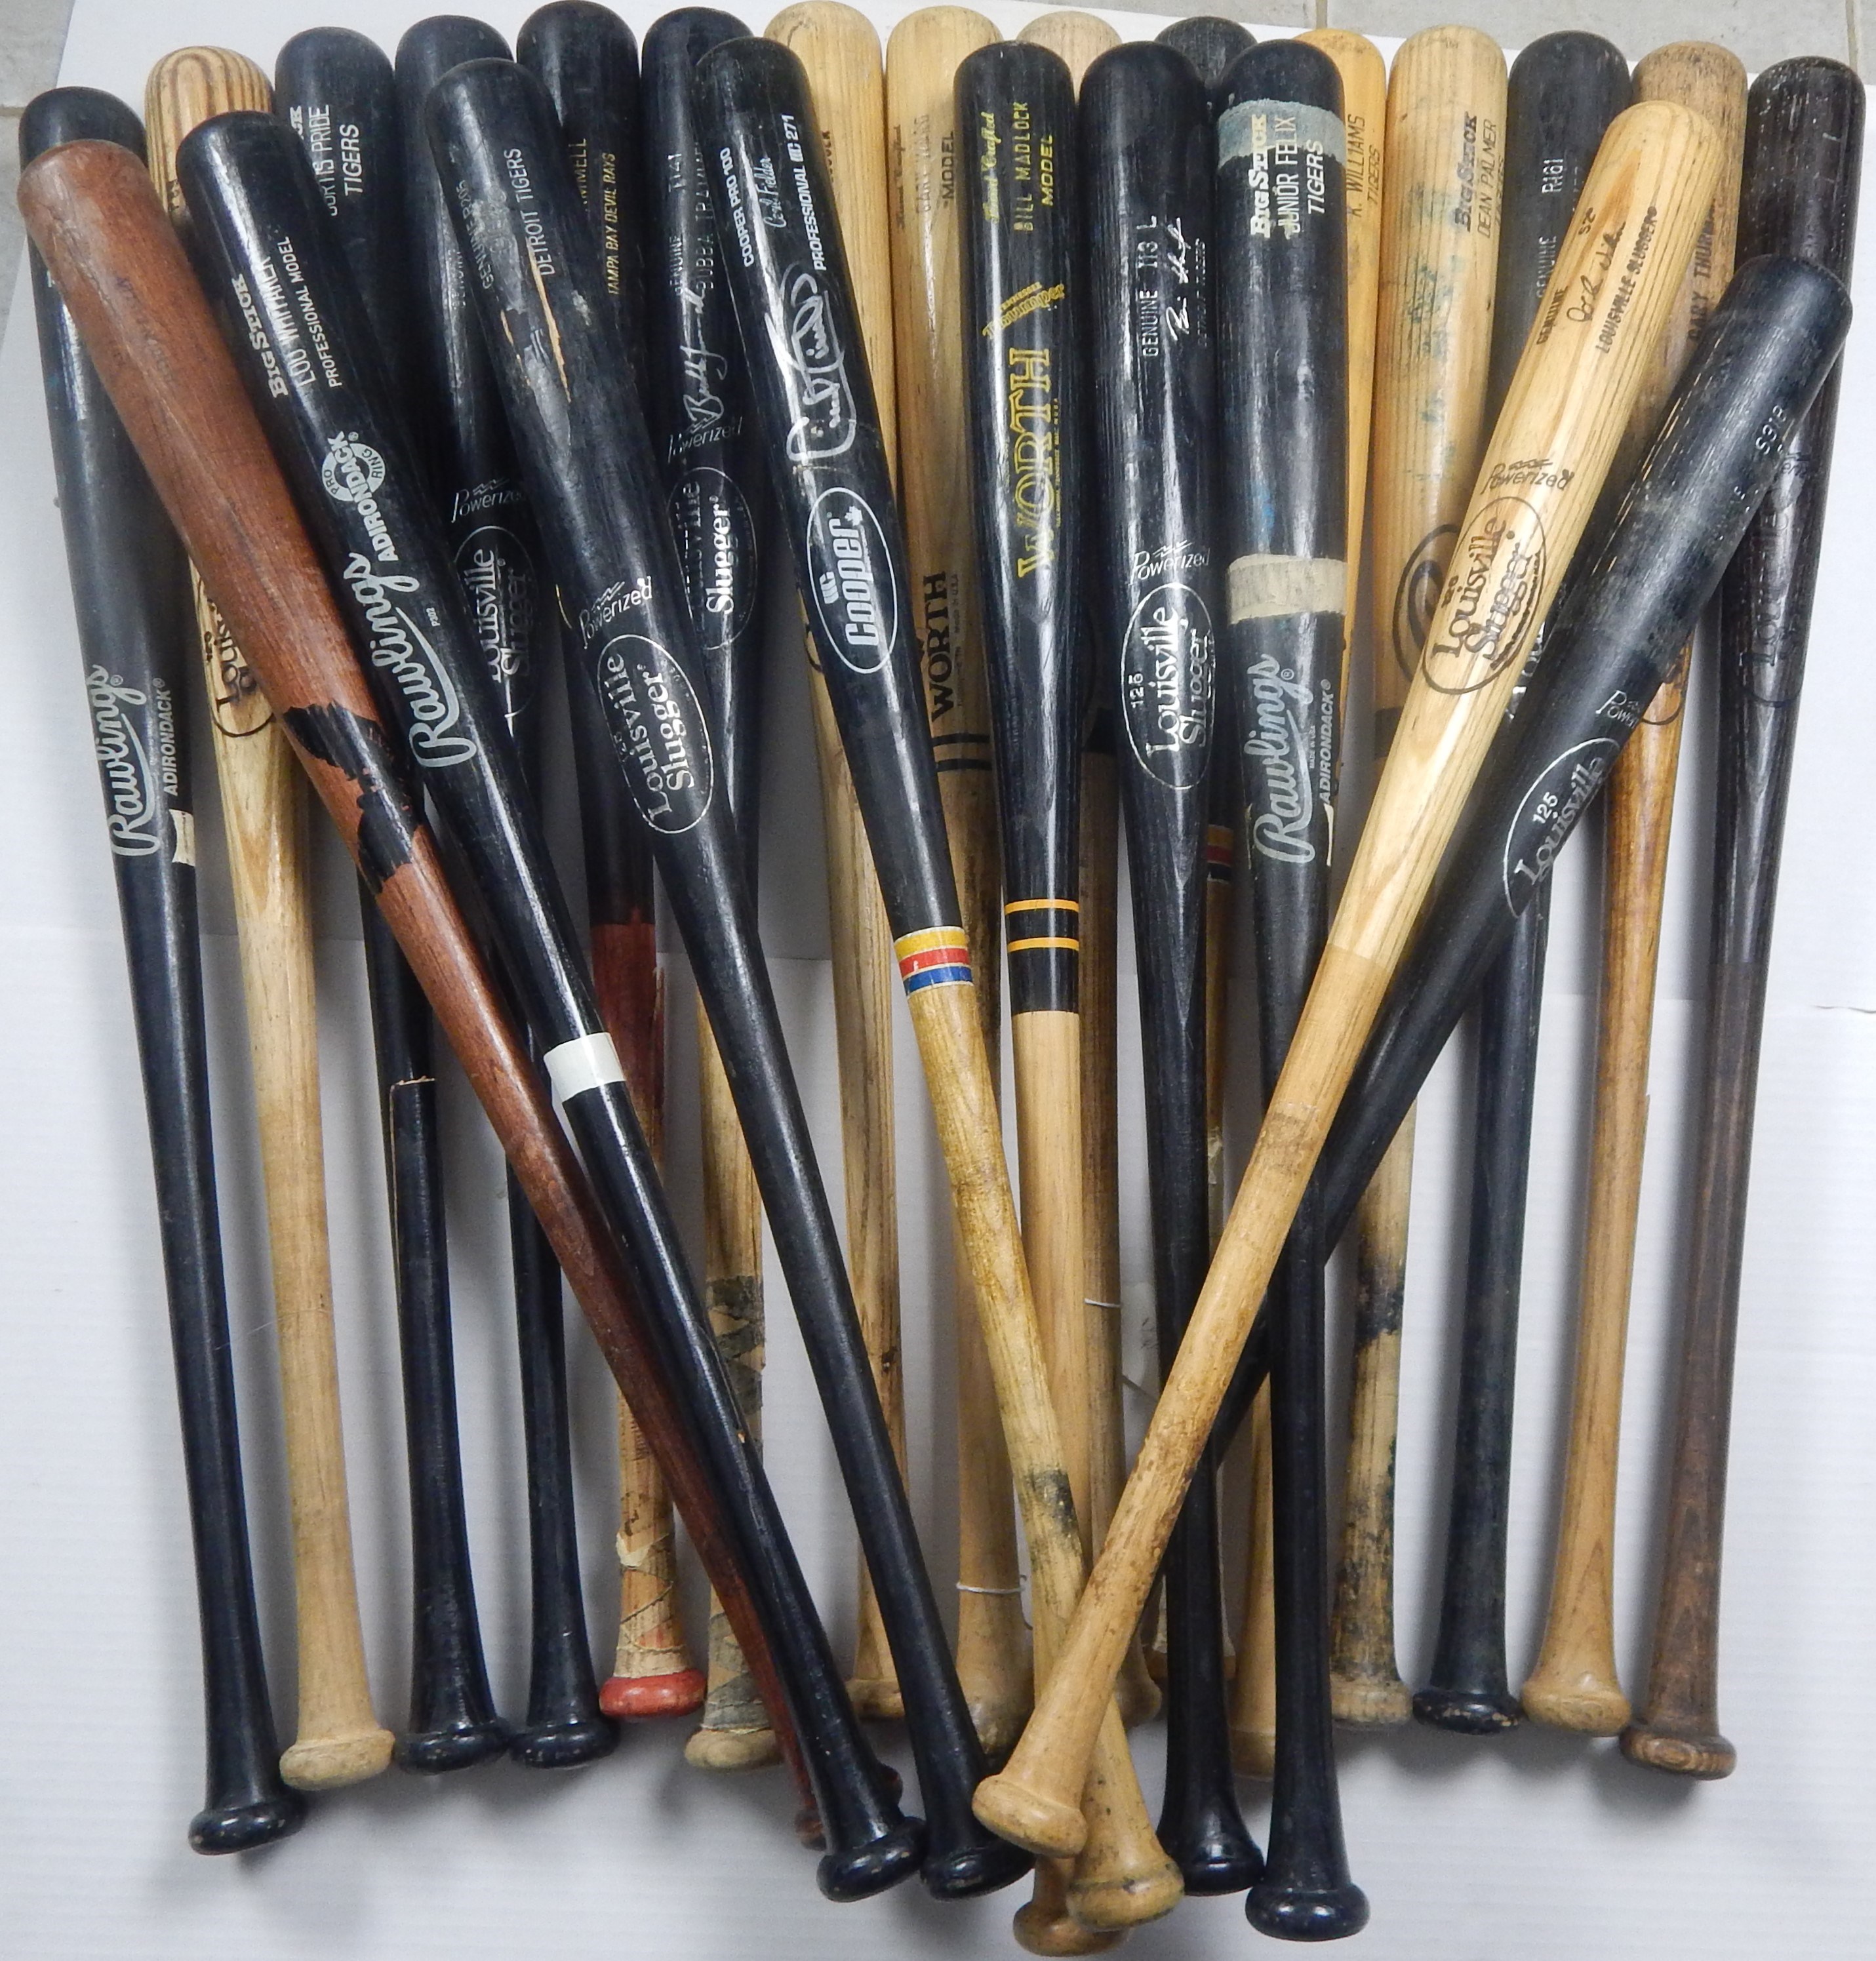 - Detroit Tigers Game Used Bats (24)